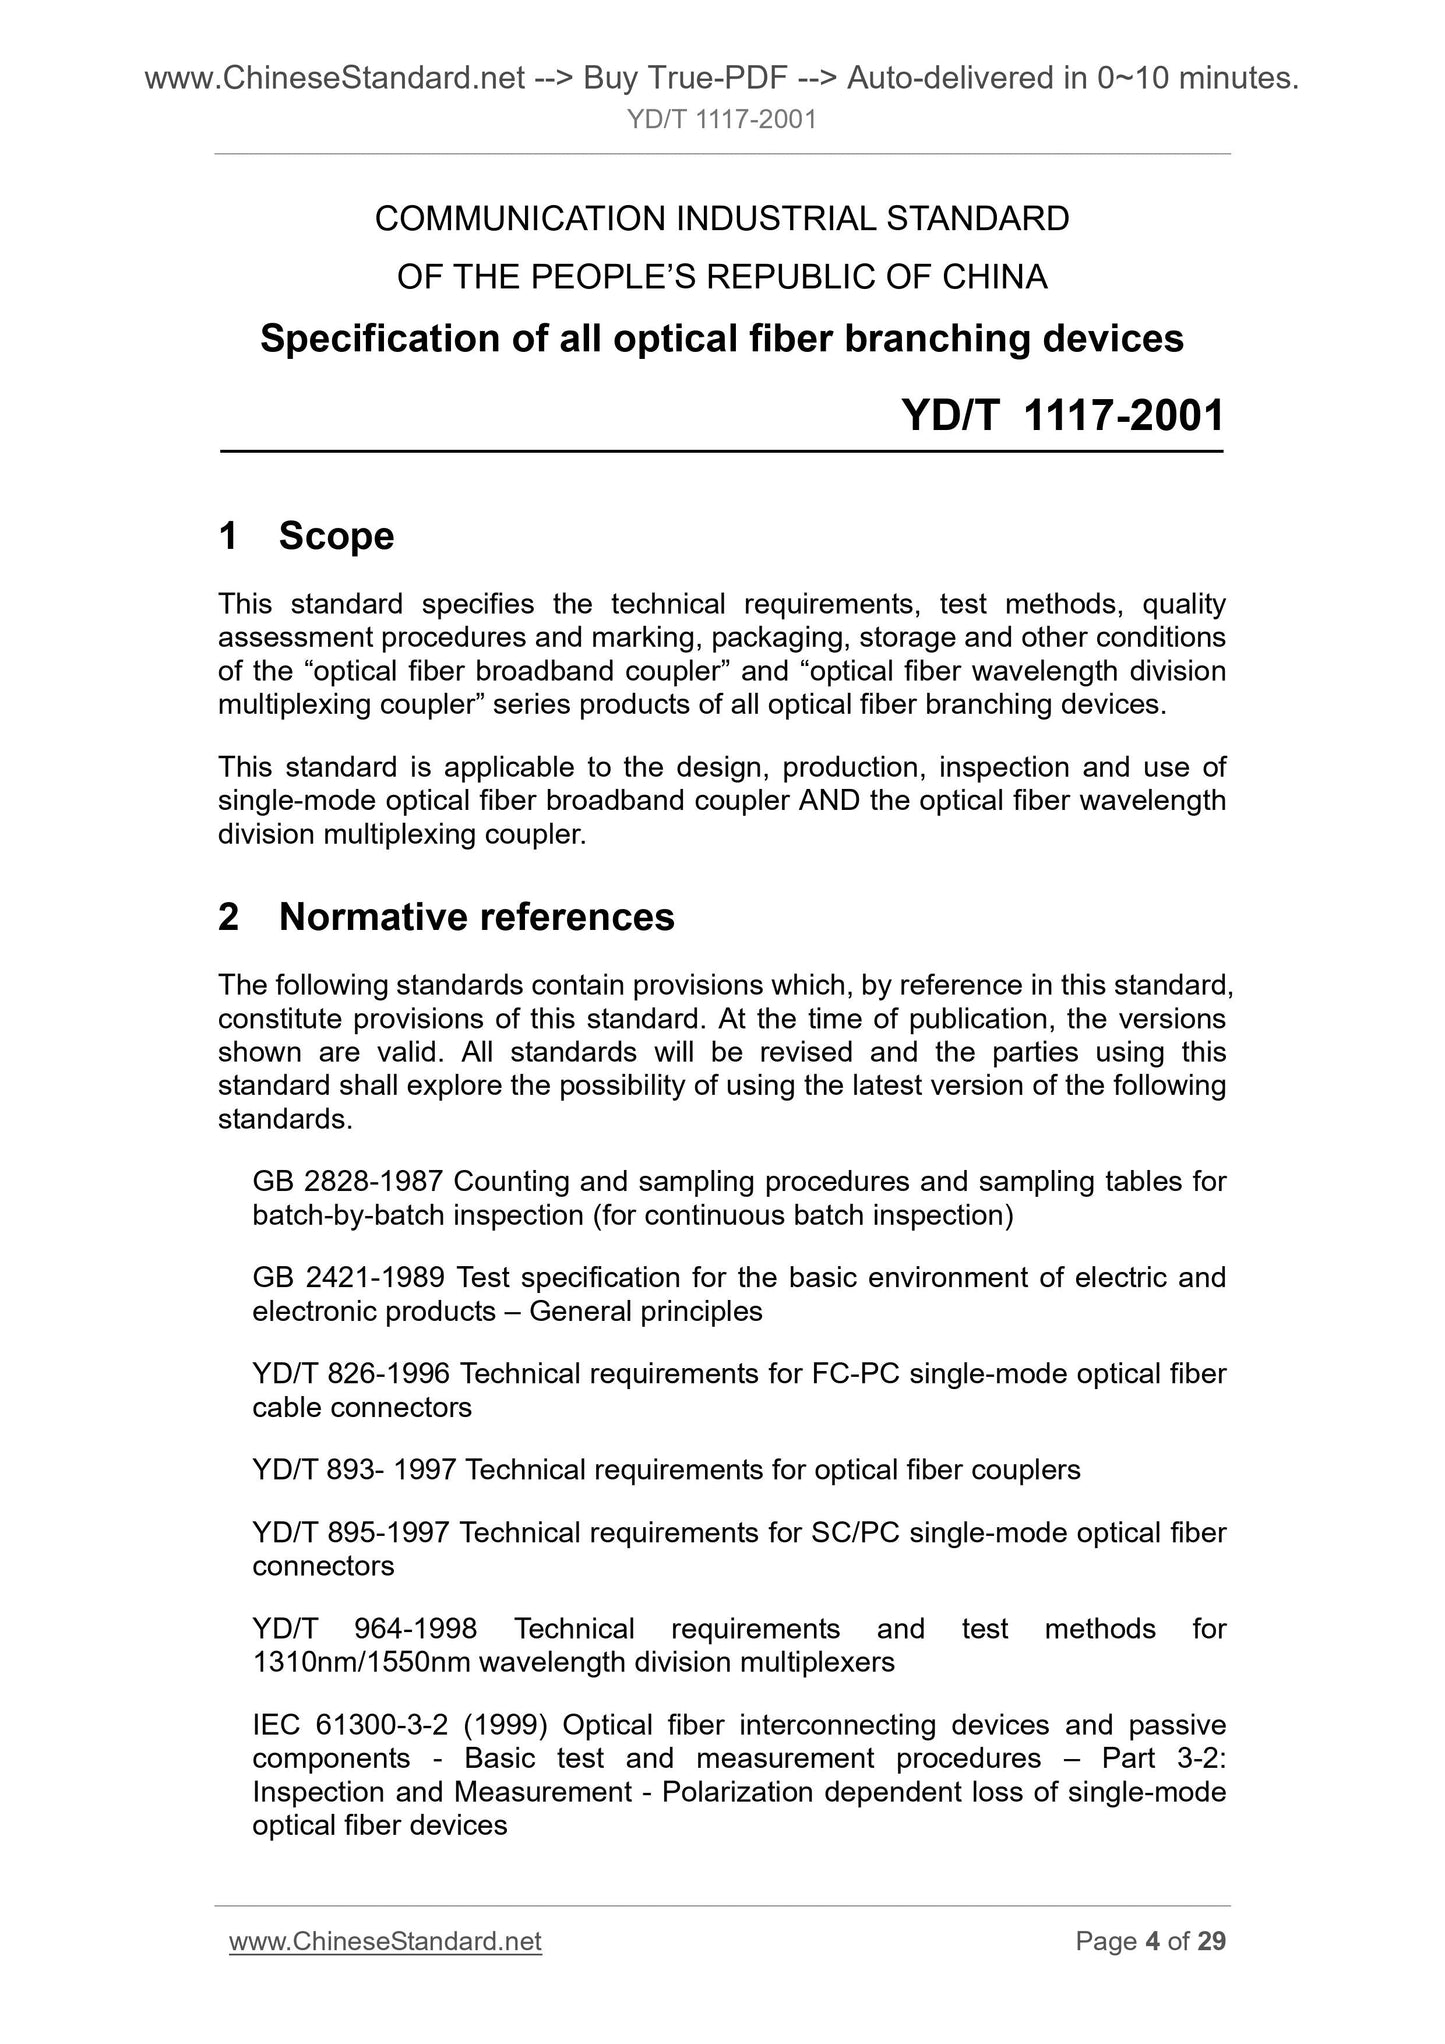 YD/T 1117-2001 Page 4